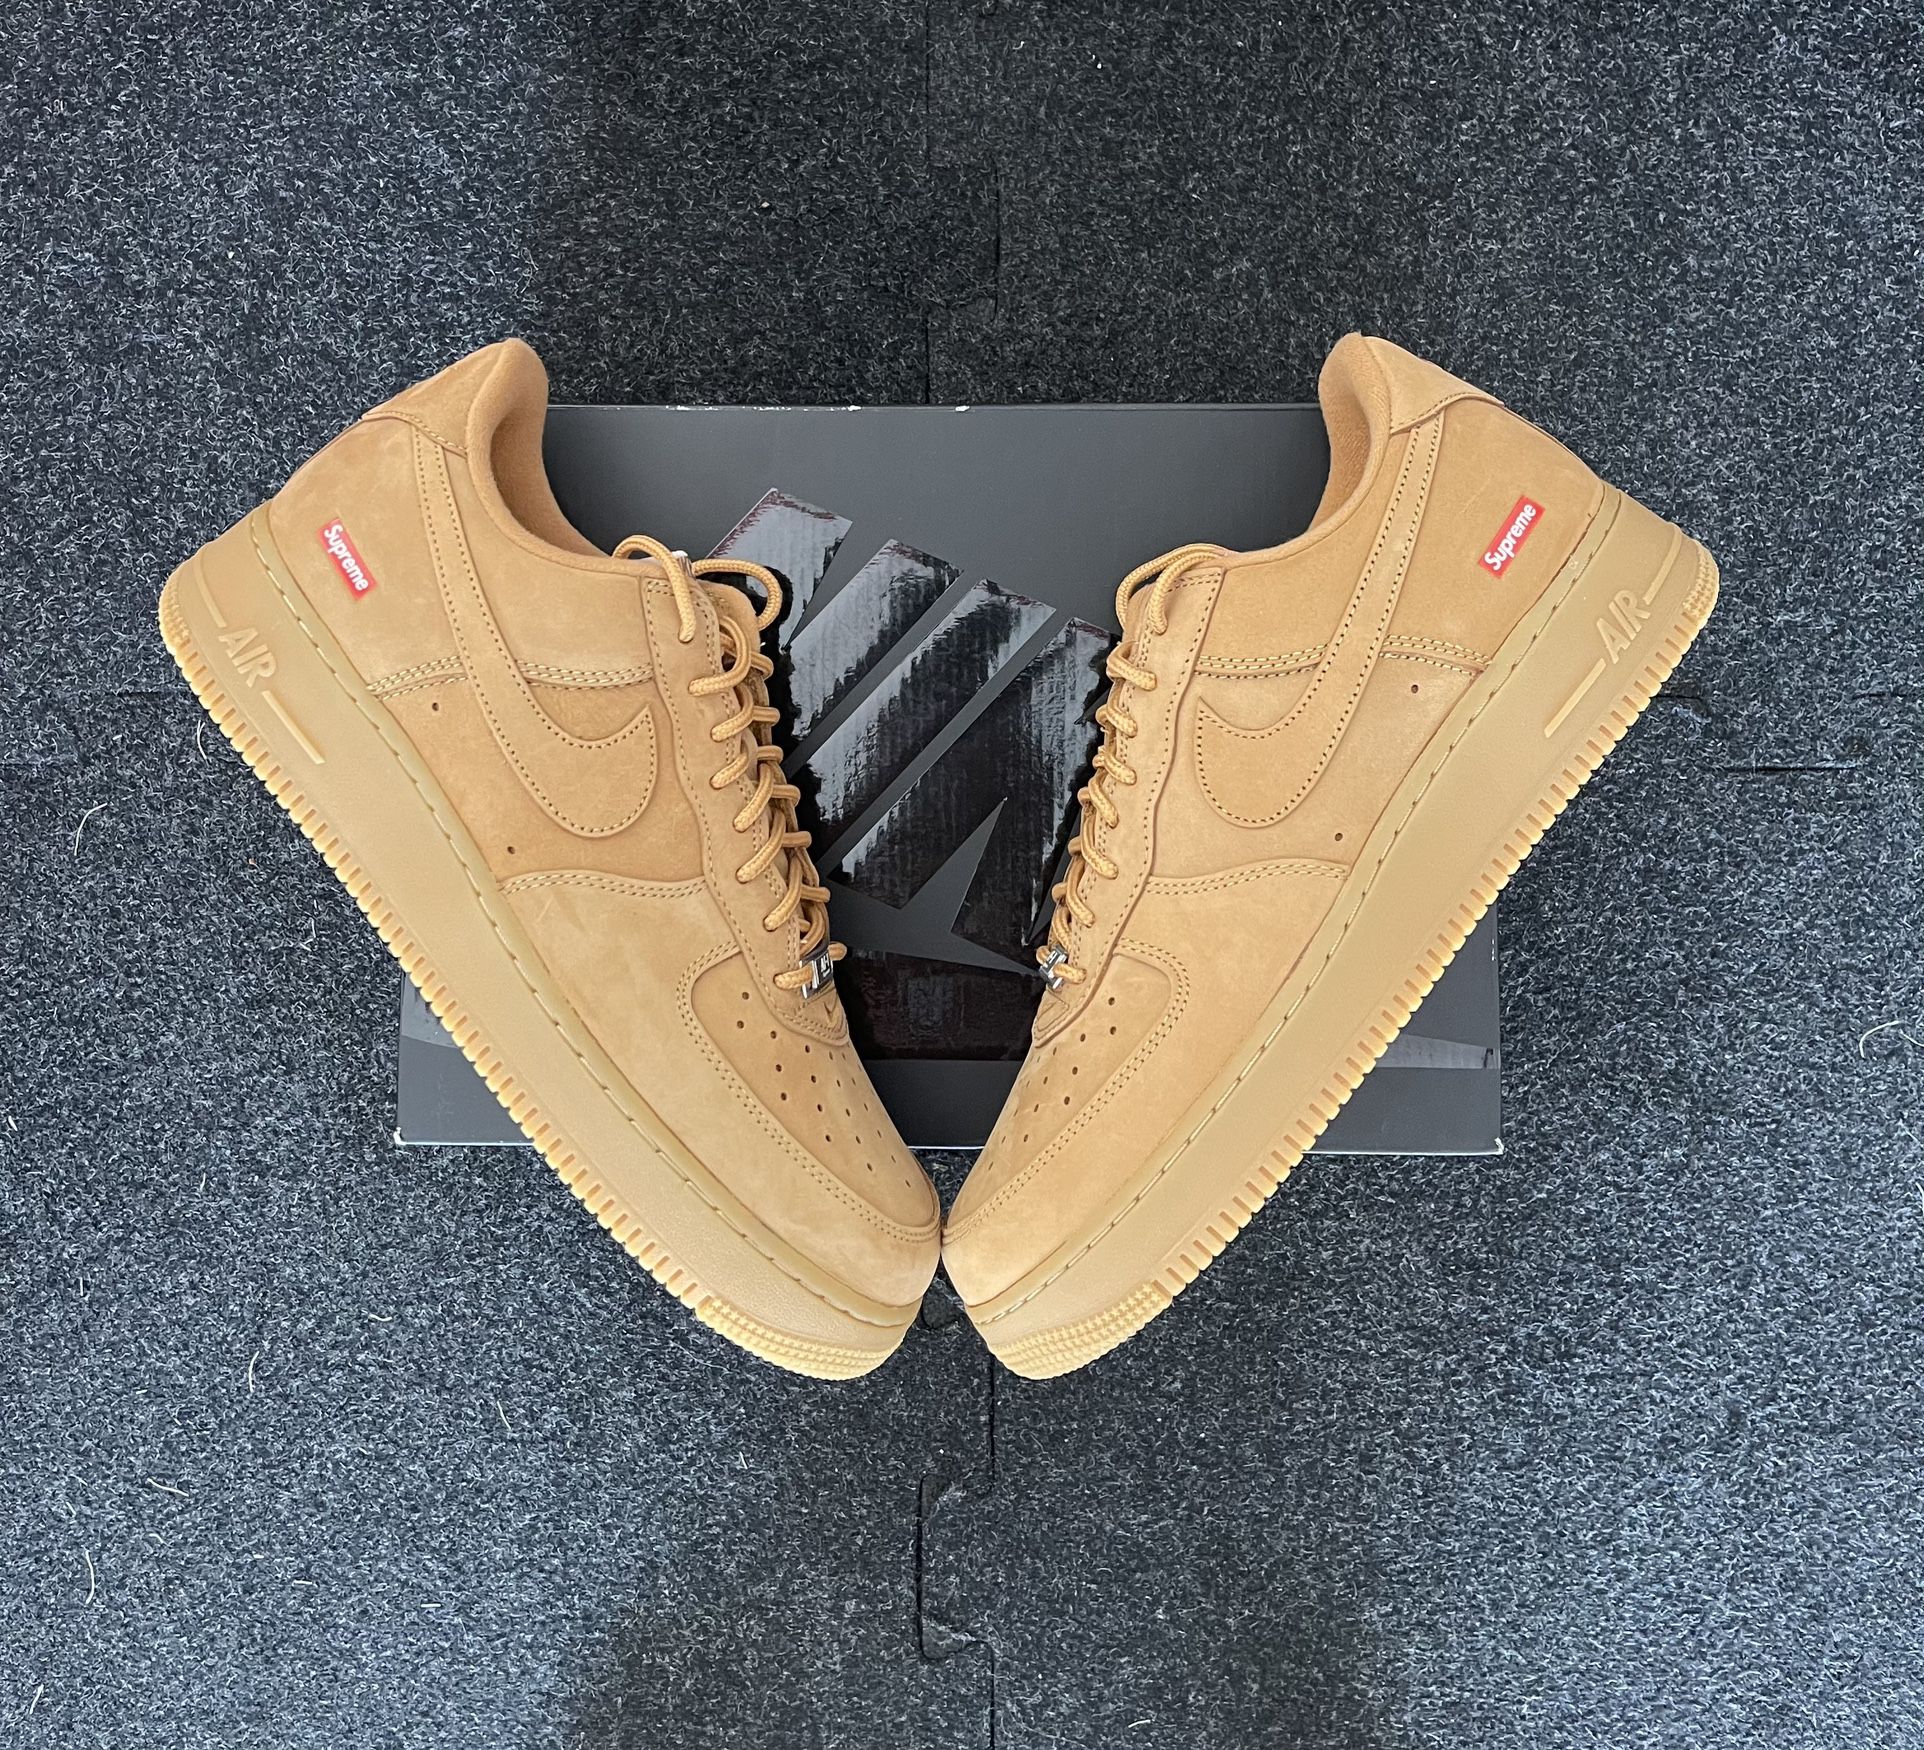 Nike Air Force 1 Low SP Supreme Wheat Size 10.5m for Sale in Los